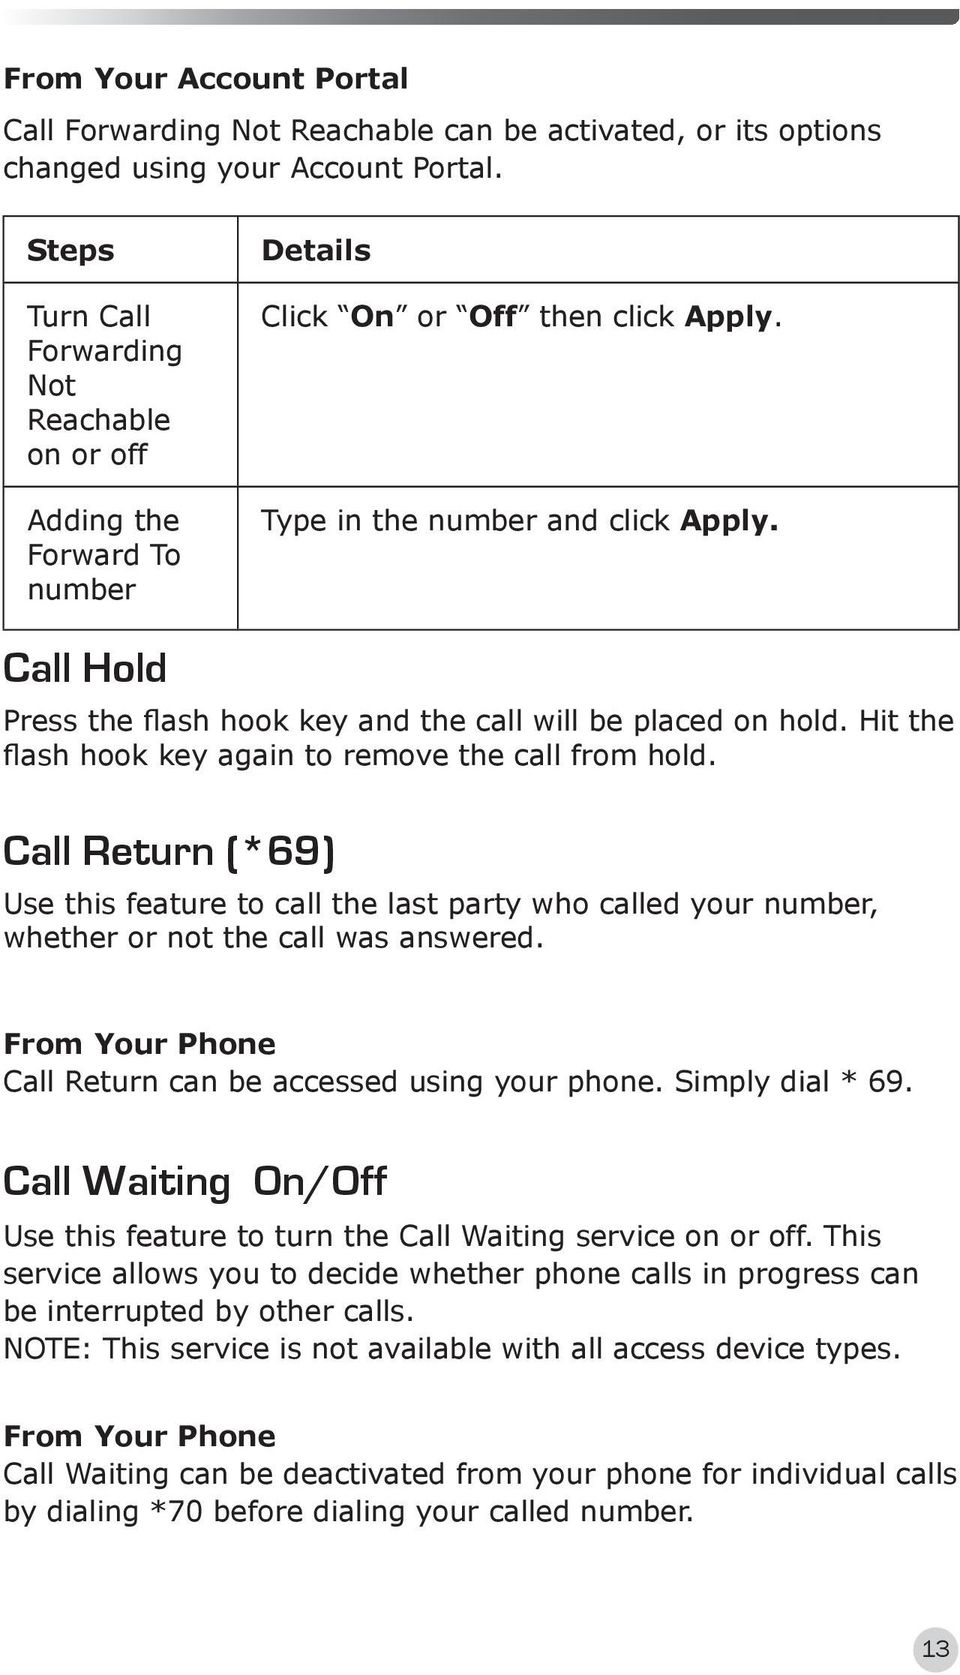 Call Hold Press the flash hook key and the call will be placed on hold. Hit the flash hook key again to remove the call from hold.